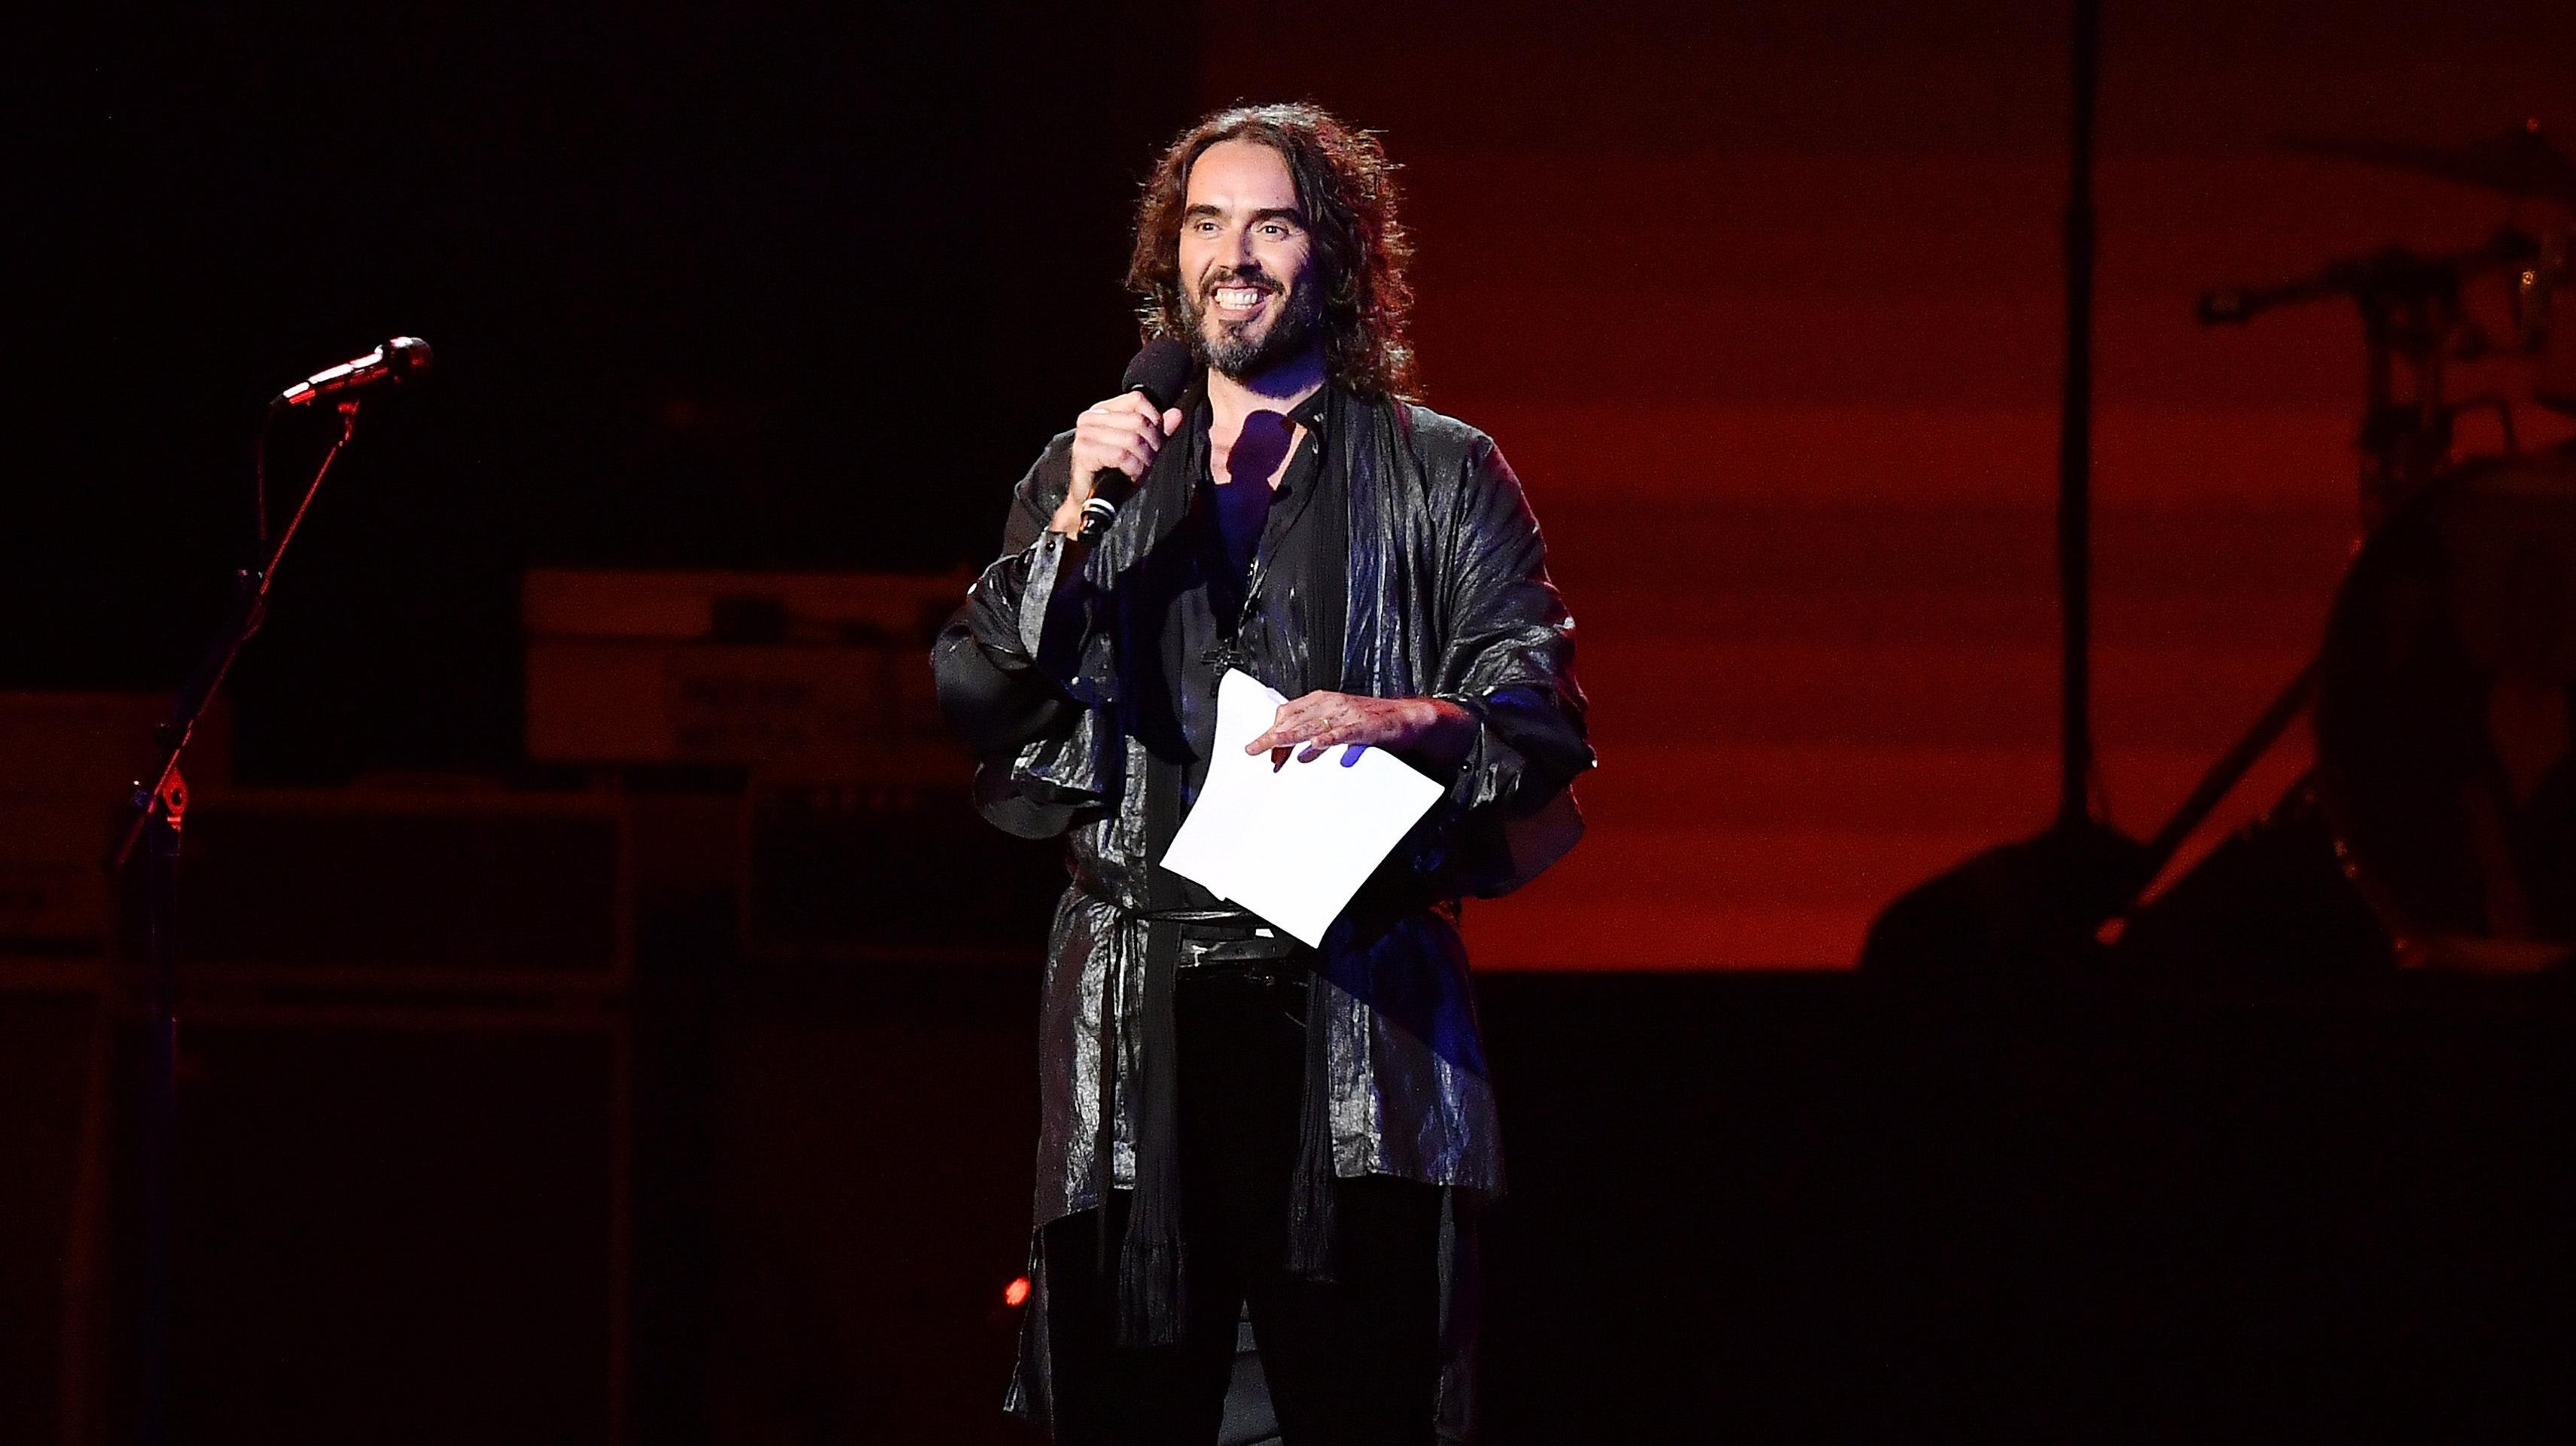 Russell Brand investigation finds inappropriate behavior dismissed as “Russell being Russell”